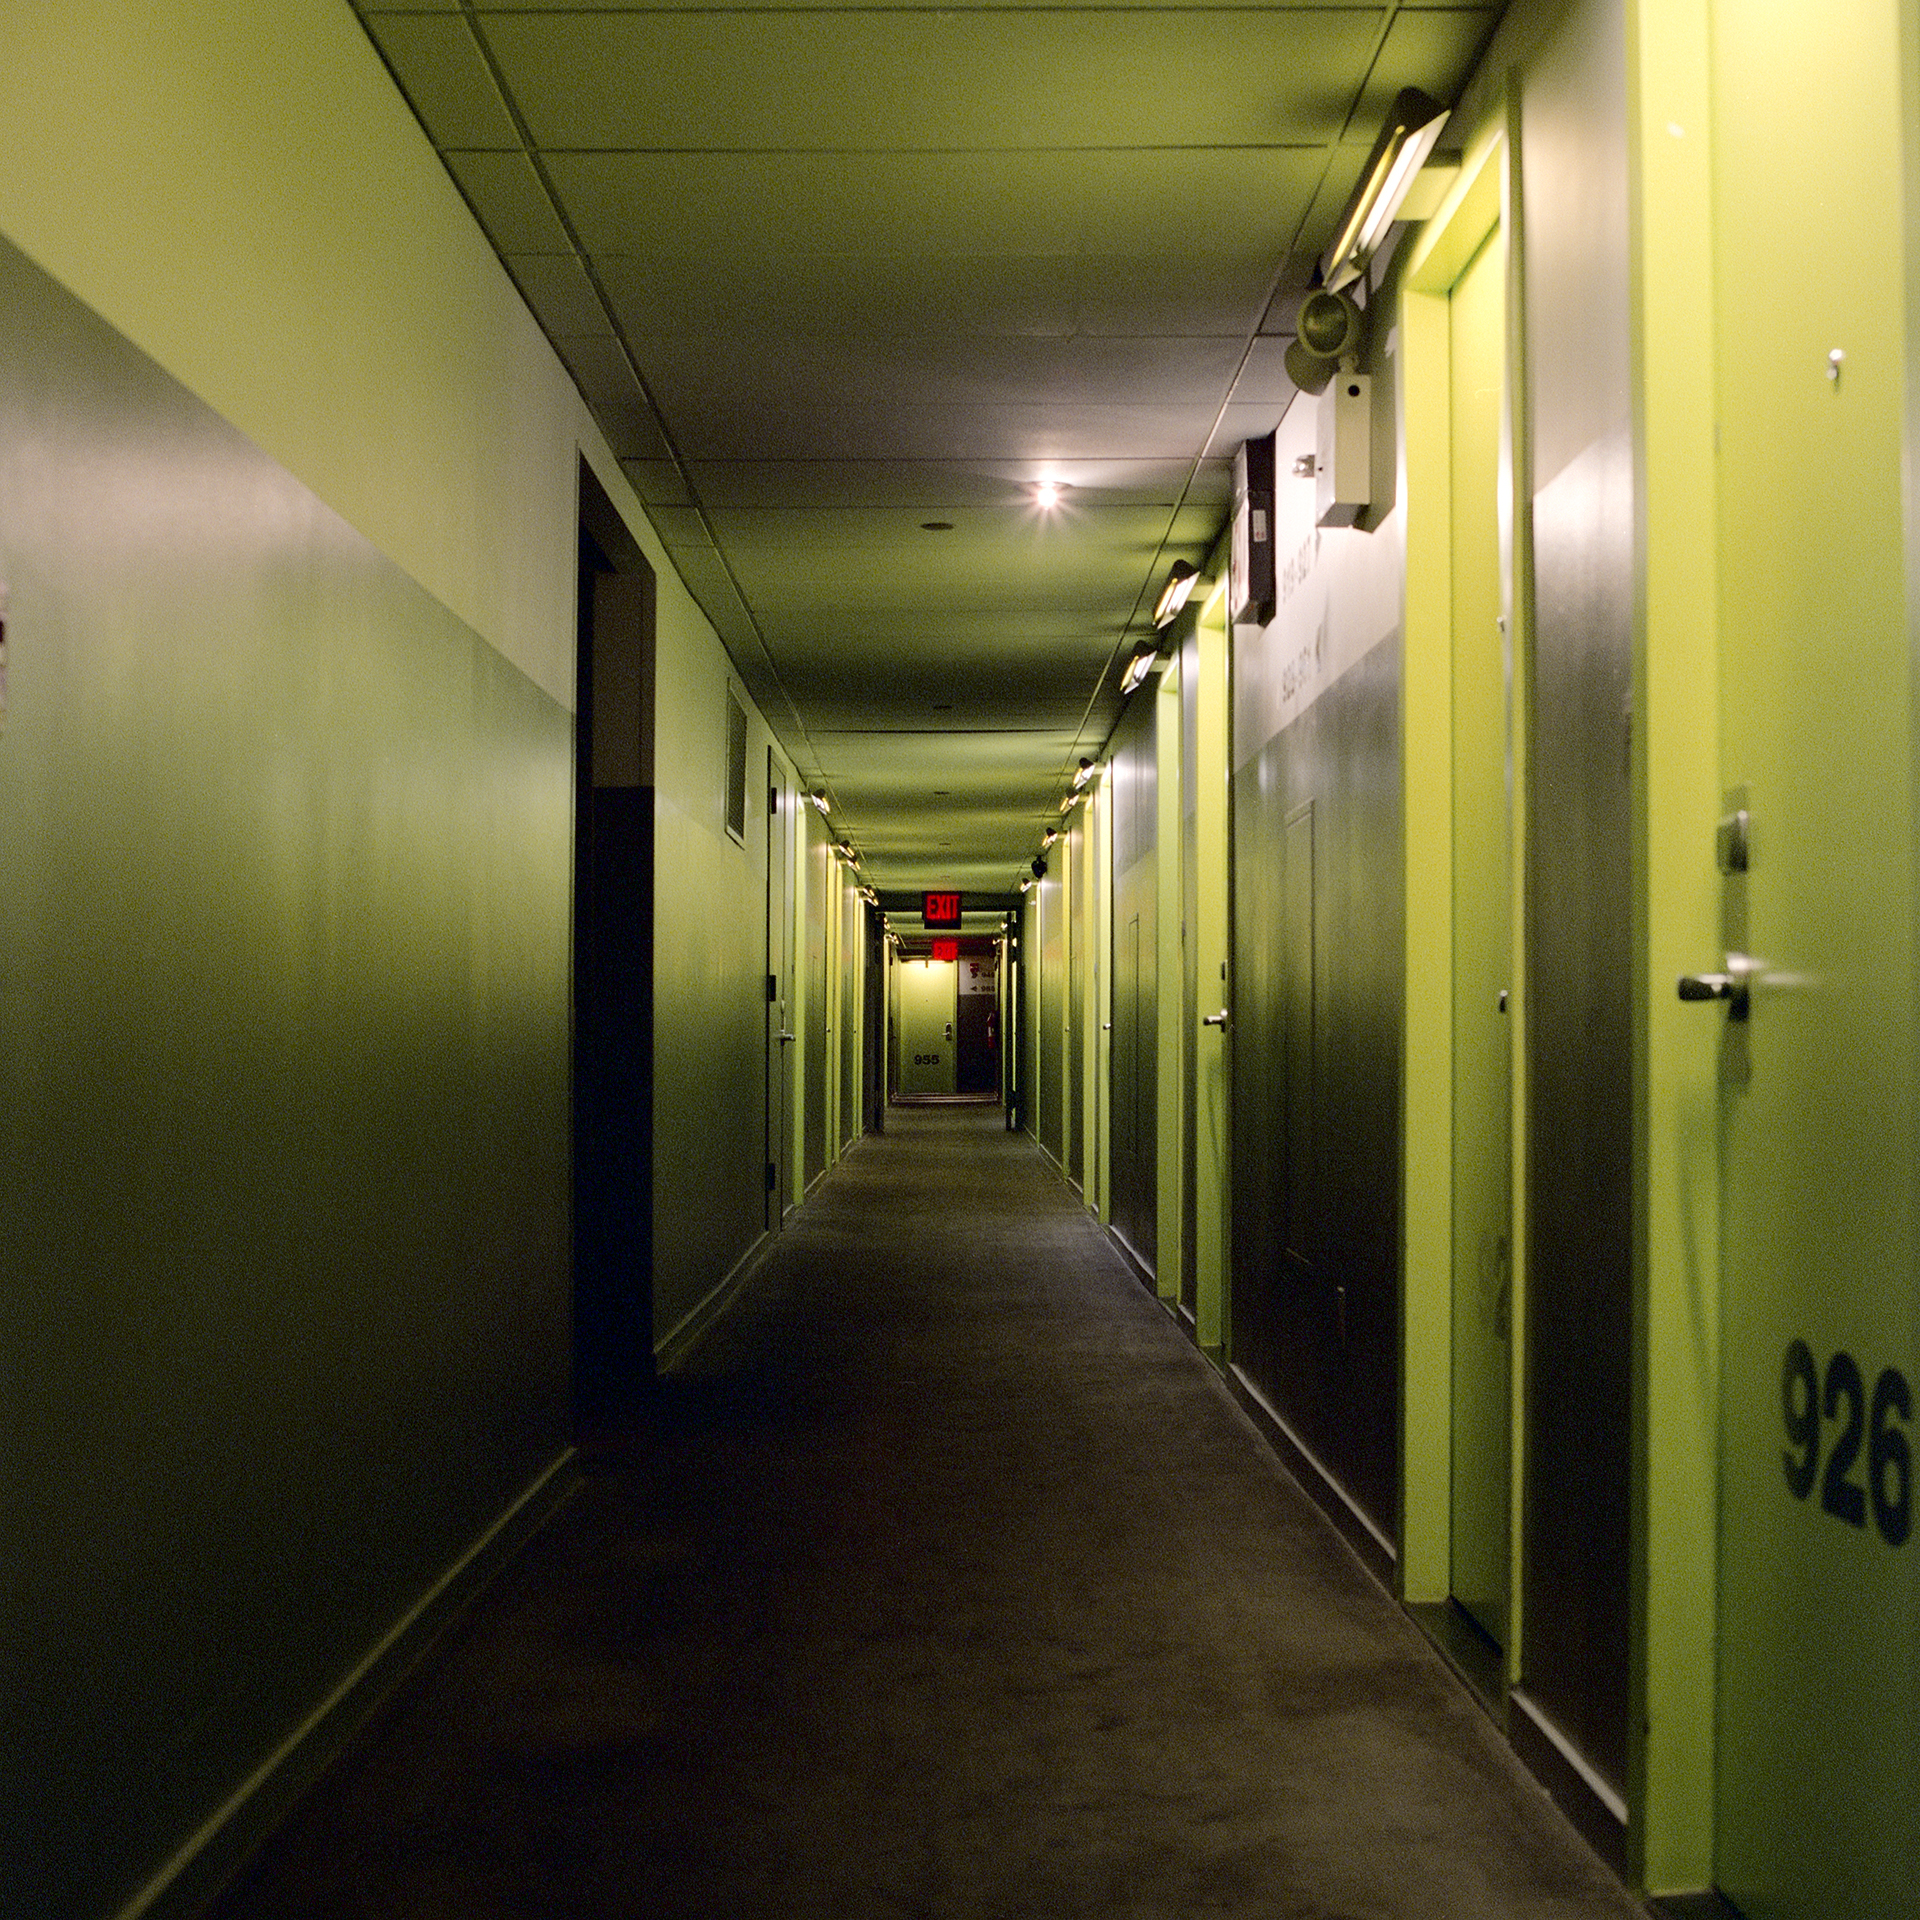 Back at Yotel, looking down the corridor of rooms